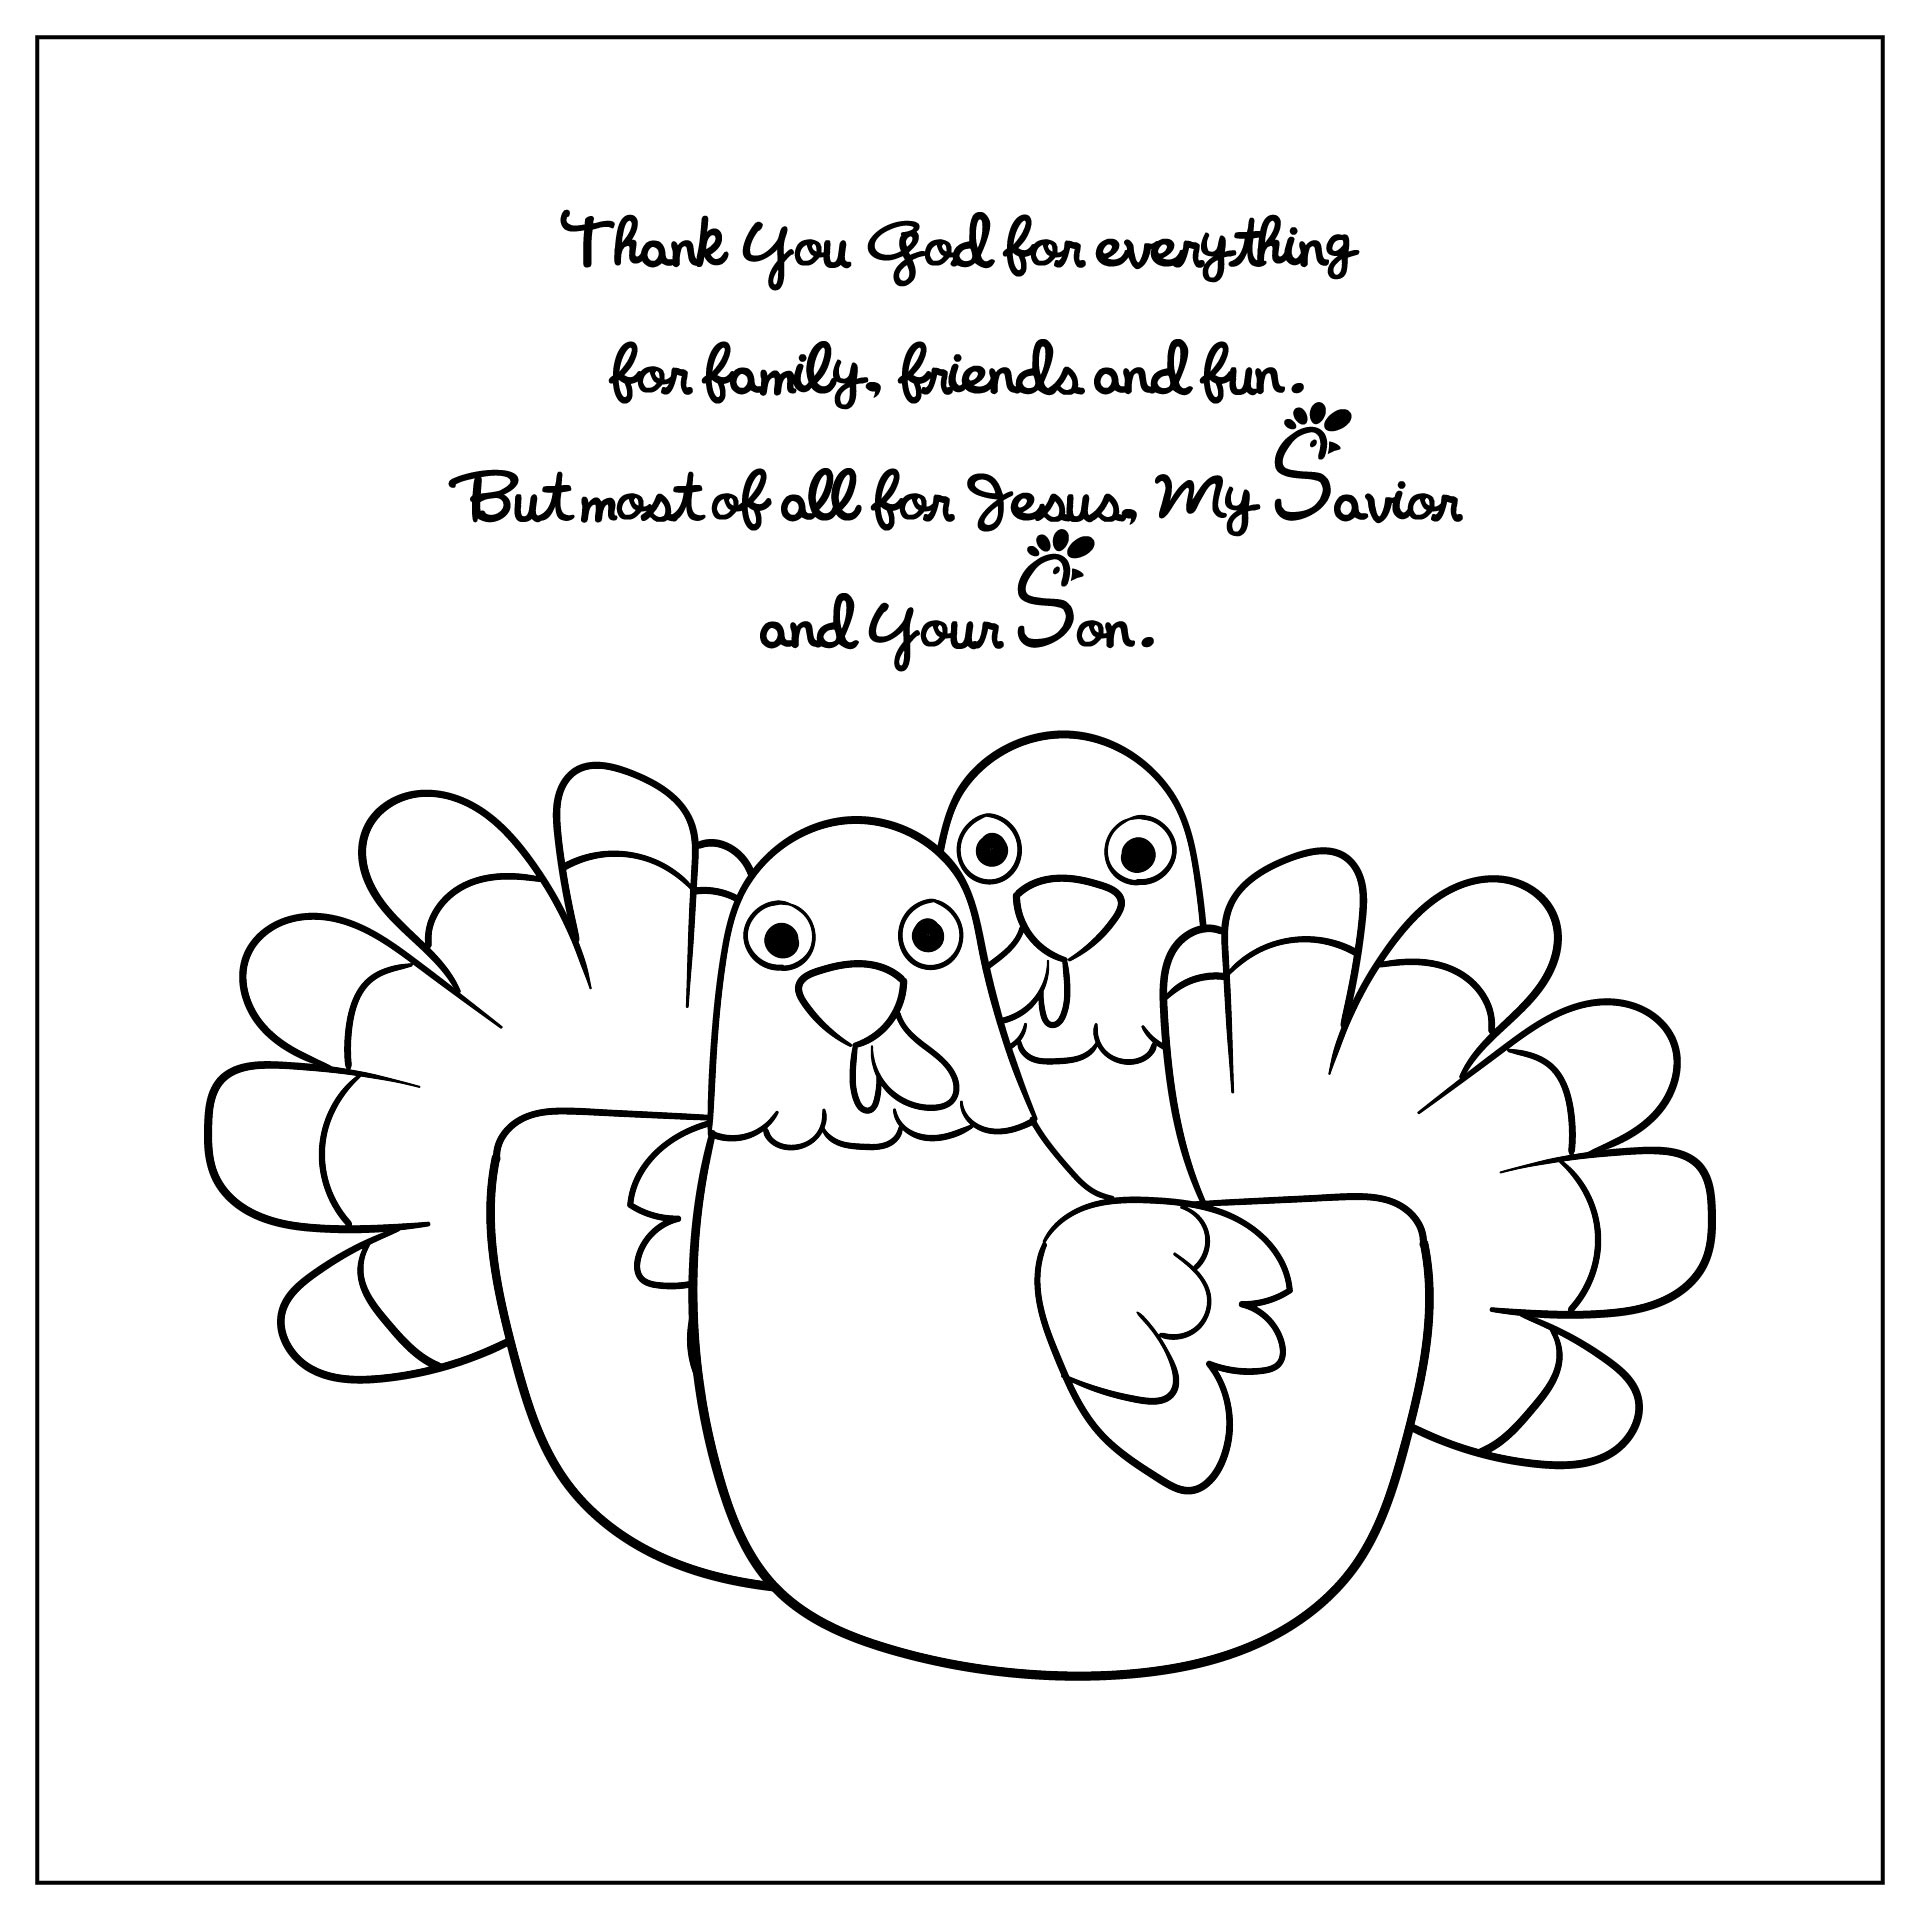 Printable Religious Thanksgiving Coloring Pages